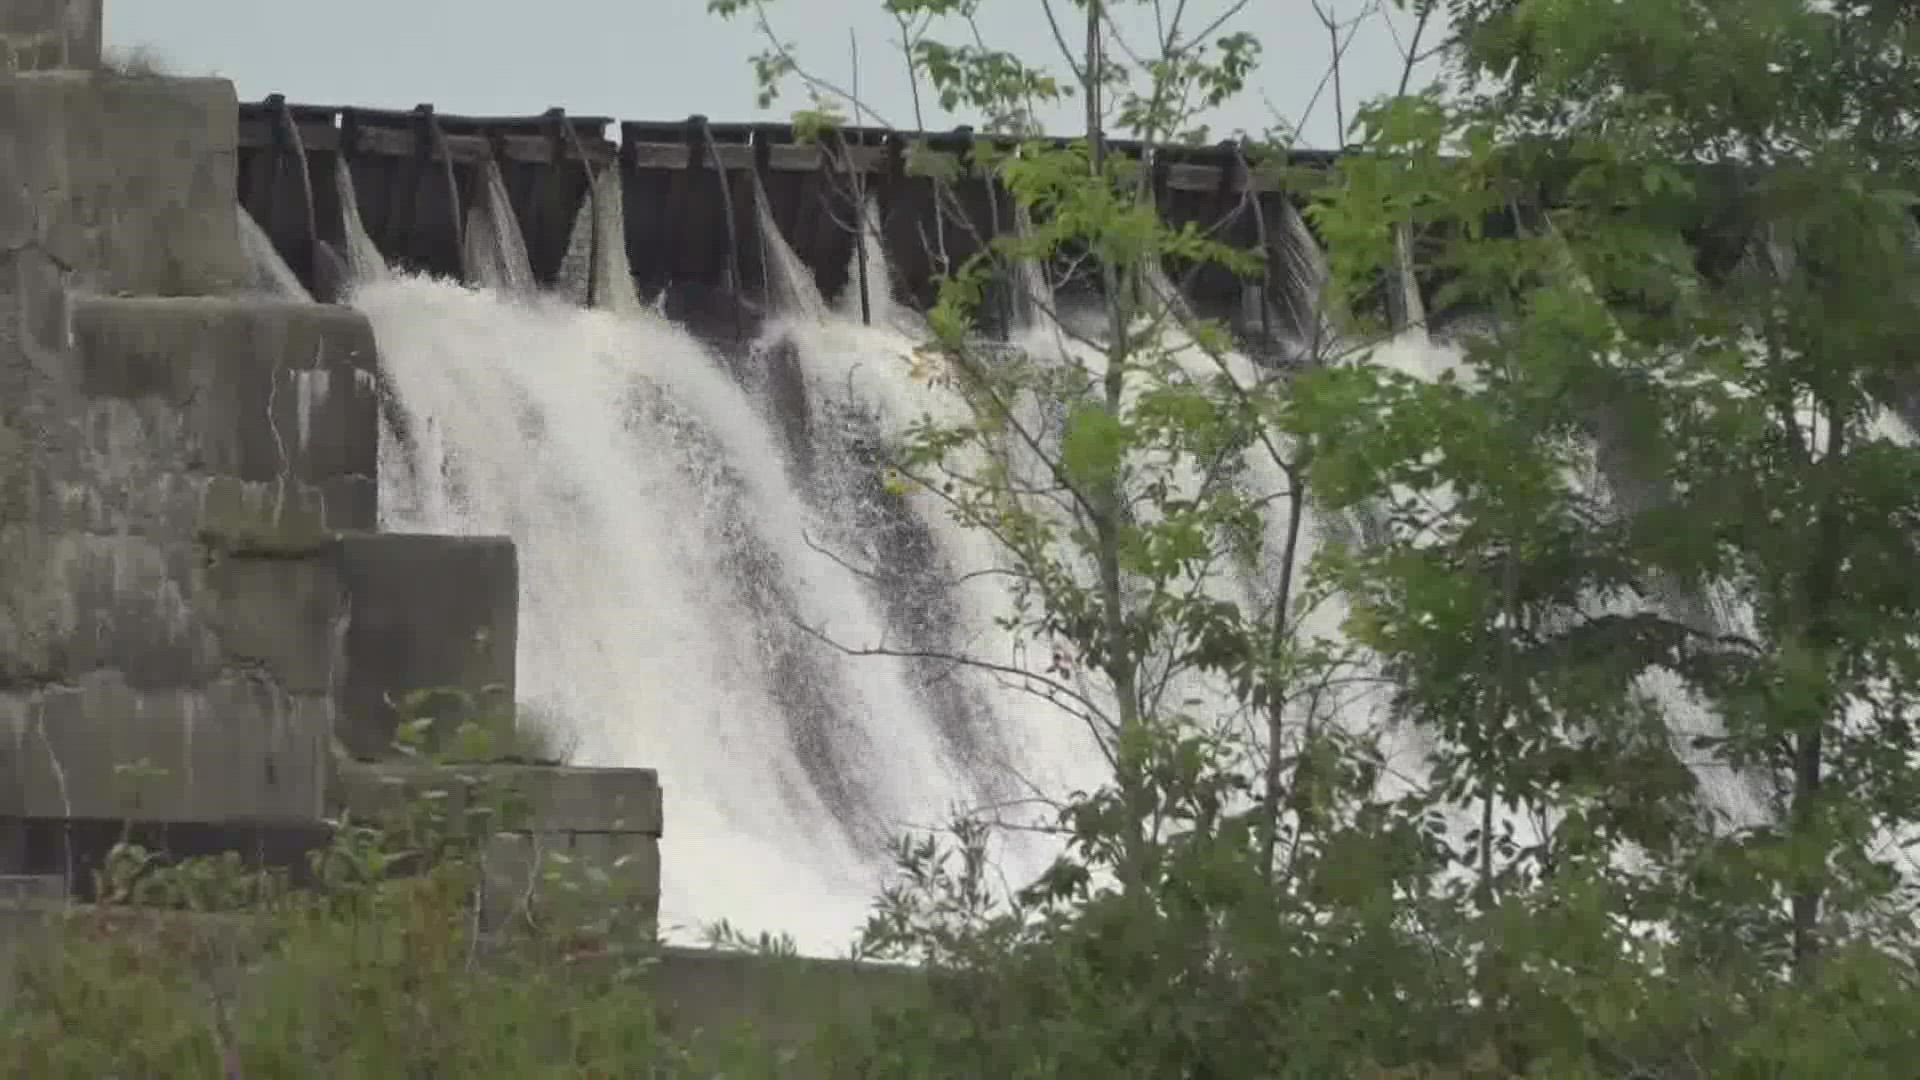 The Shawmut Dam in Fairfield is up for relicensing; if it's removed, the Sappi Paper Mill in Skowhegan could be forced to close.